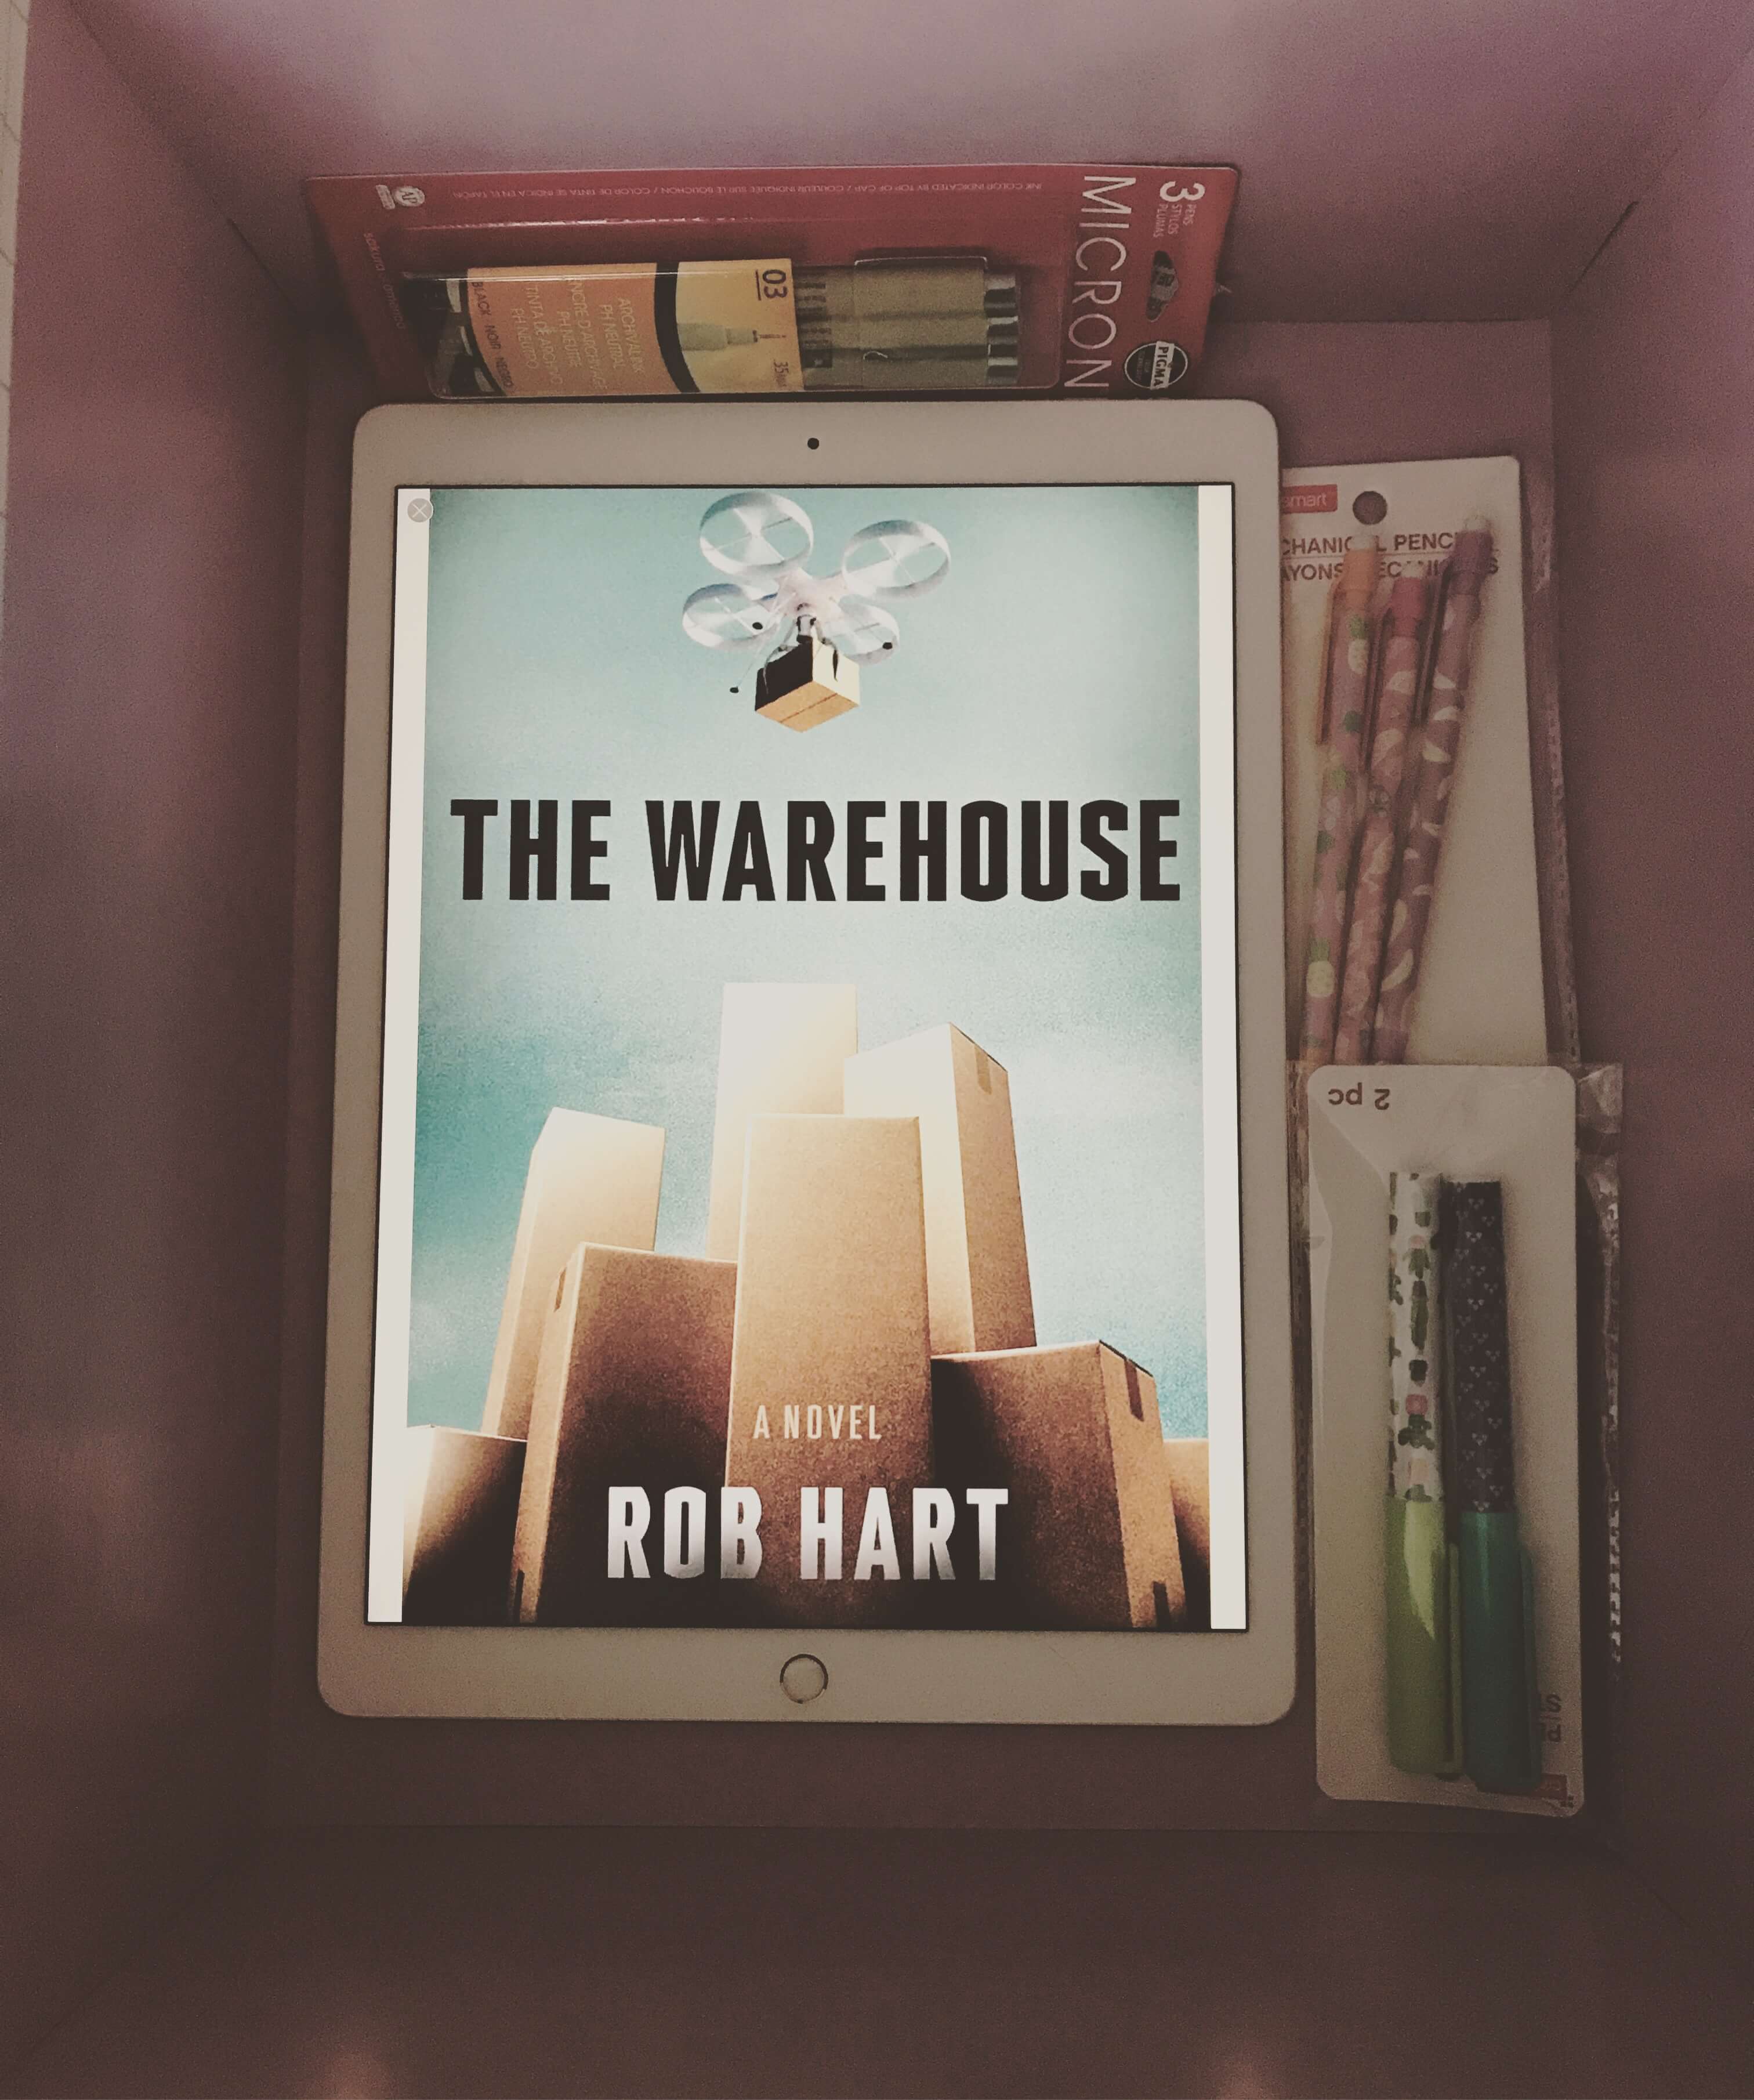 Bookstagram of The Warehouse by Rob Hart